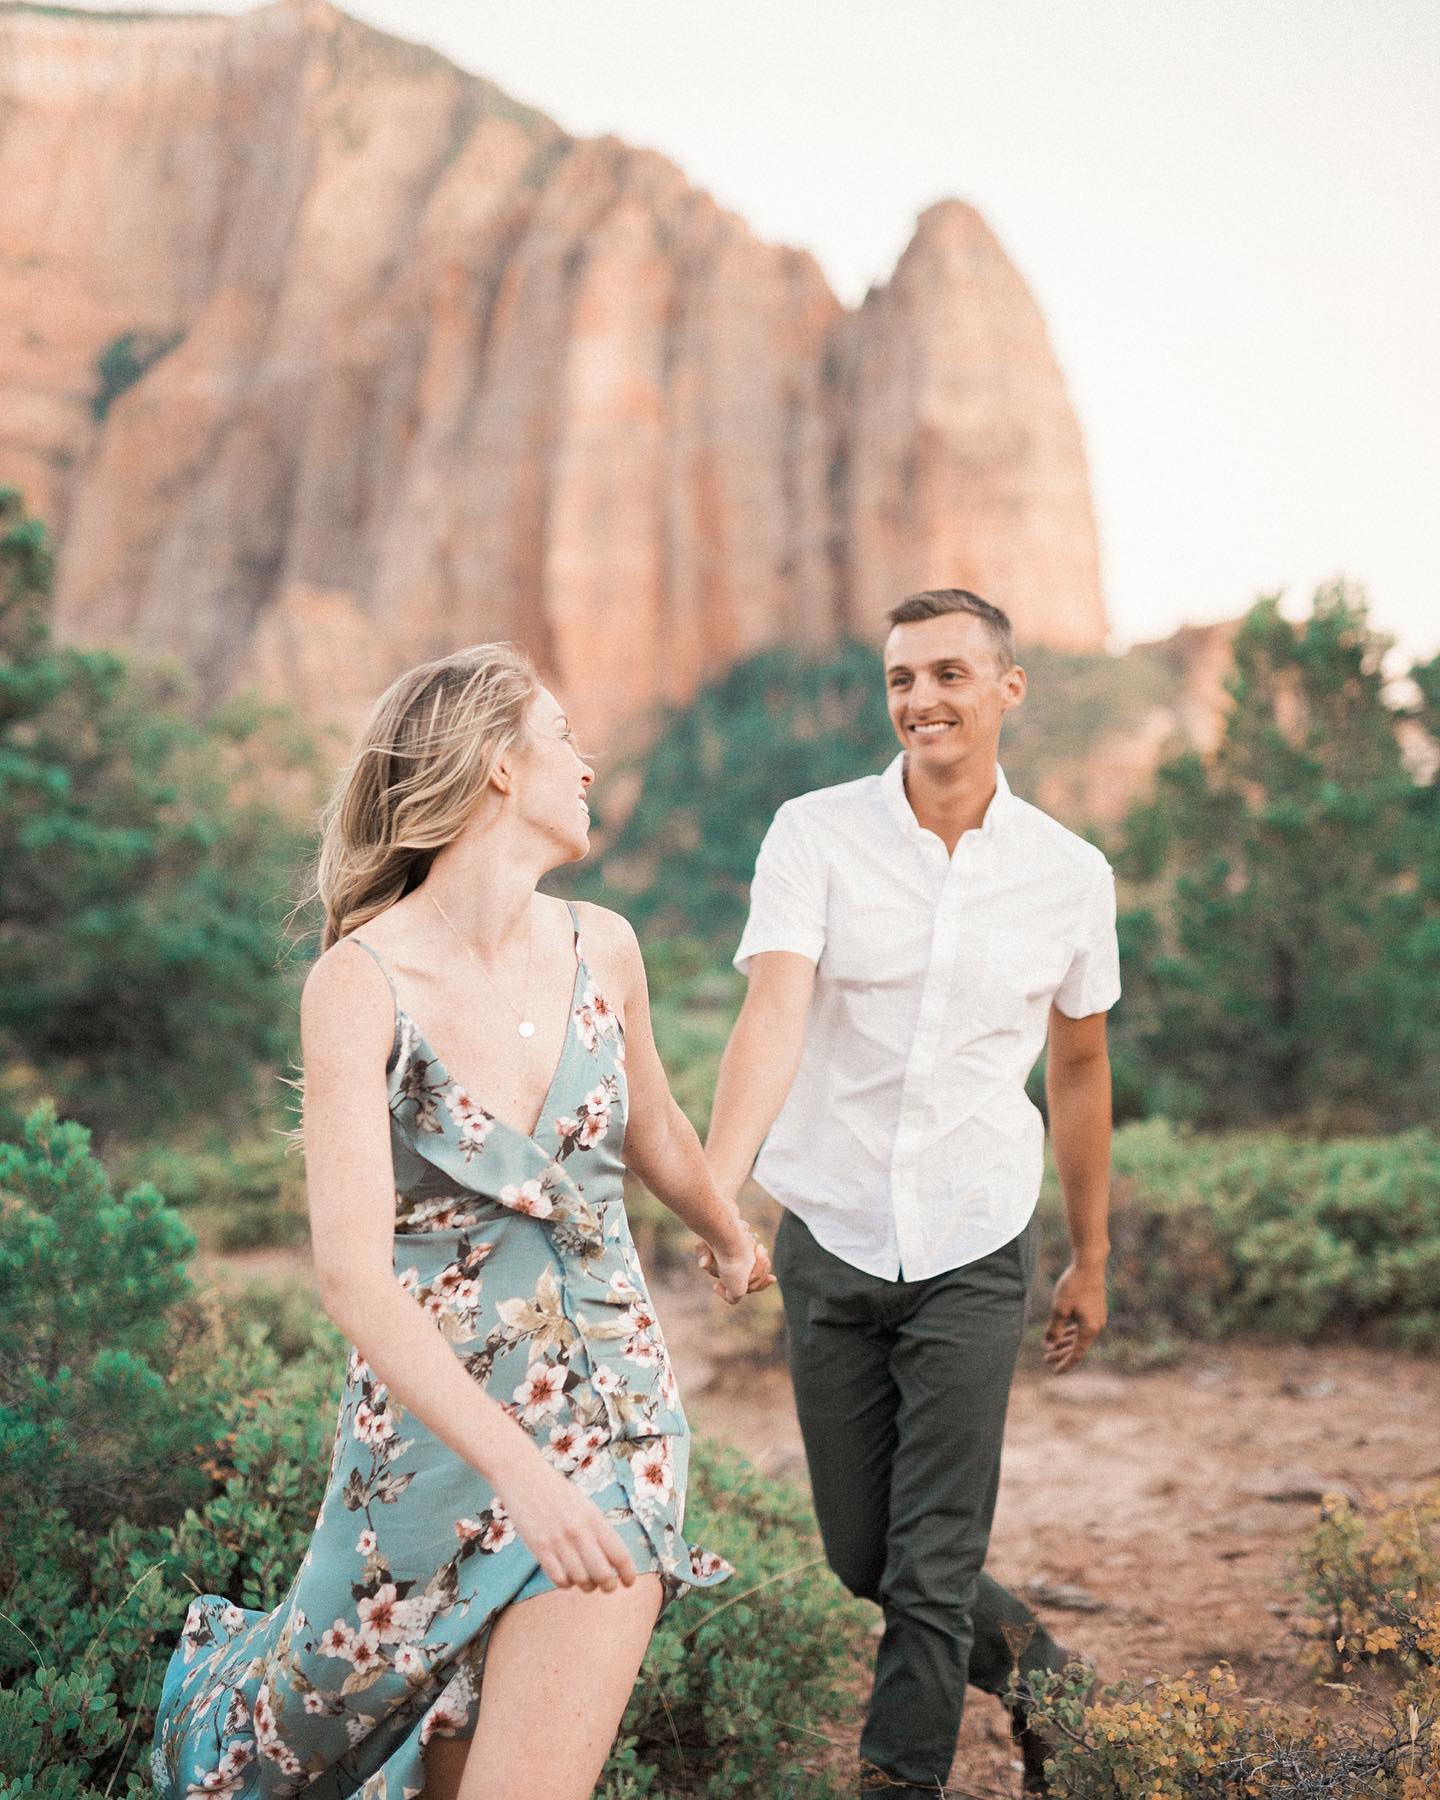 8 Outfit Ideas for Summer Engagement Photos | Junebug Weddings | Summer engagement  photos, Engagement outfits summer, Engagement photo outfits